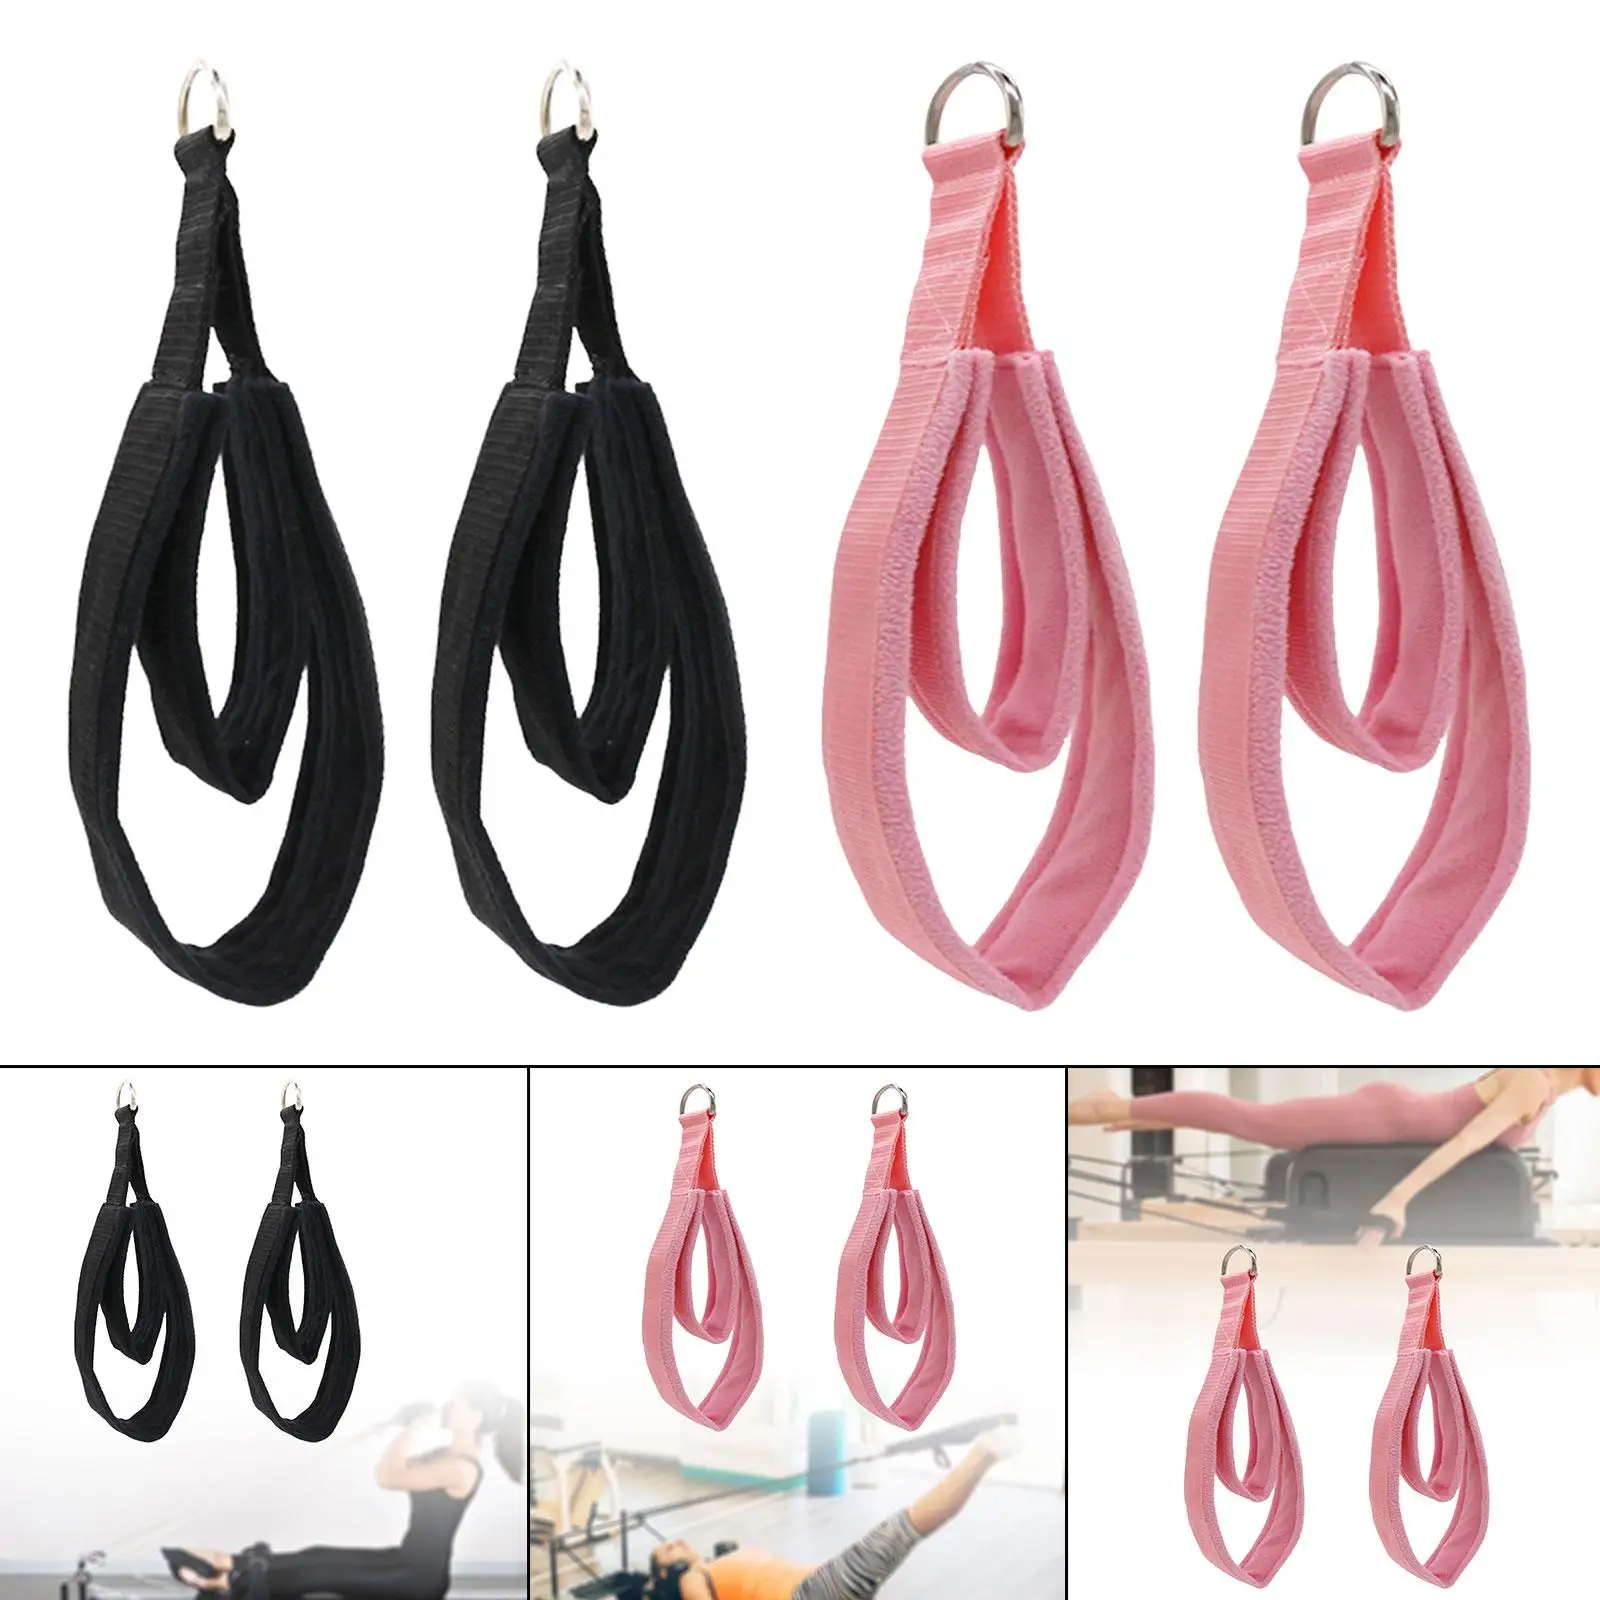 2x D Rings Straps Stretch Exercise Band Pilates Double Loop Straps Pilates Straps for Reformer Home Gym Gymnastics Women Men